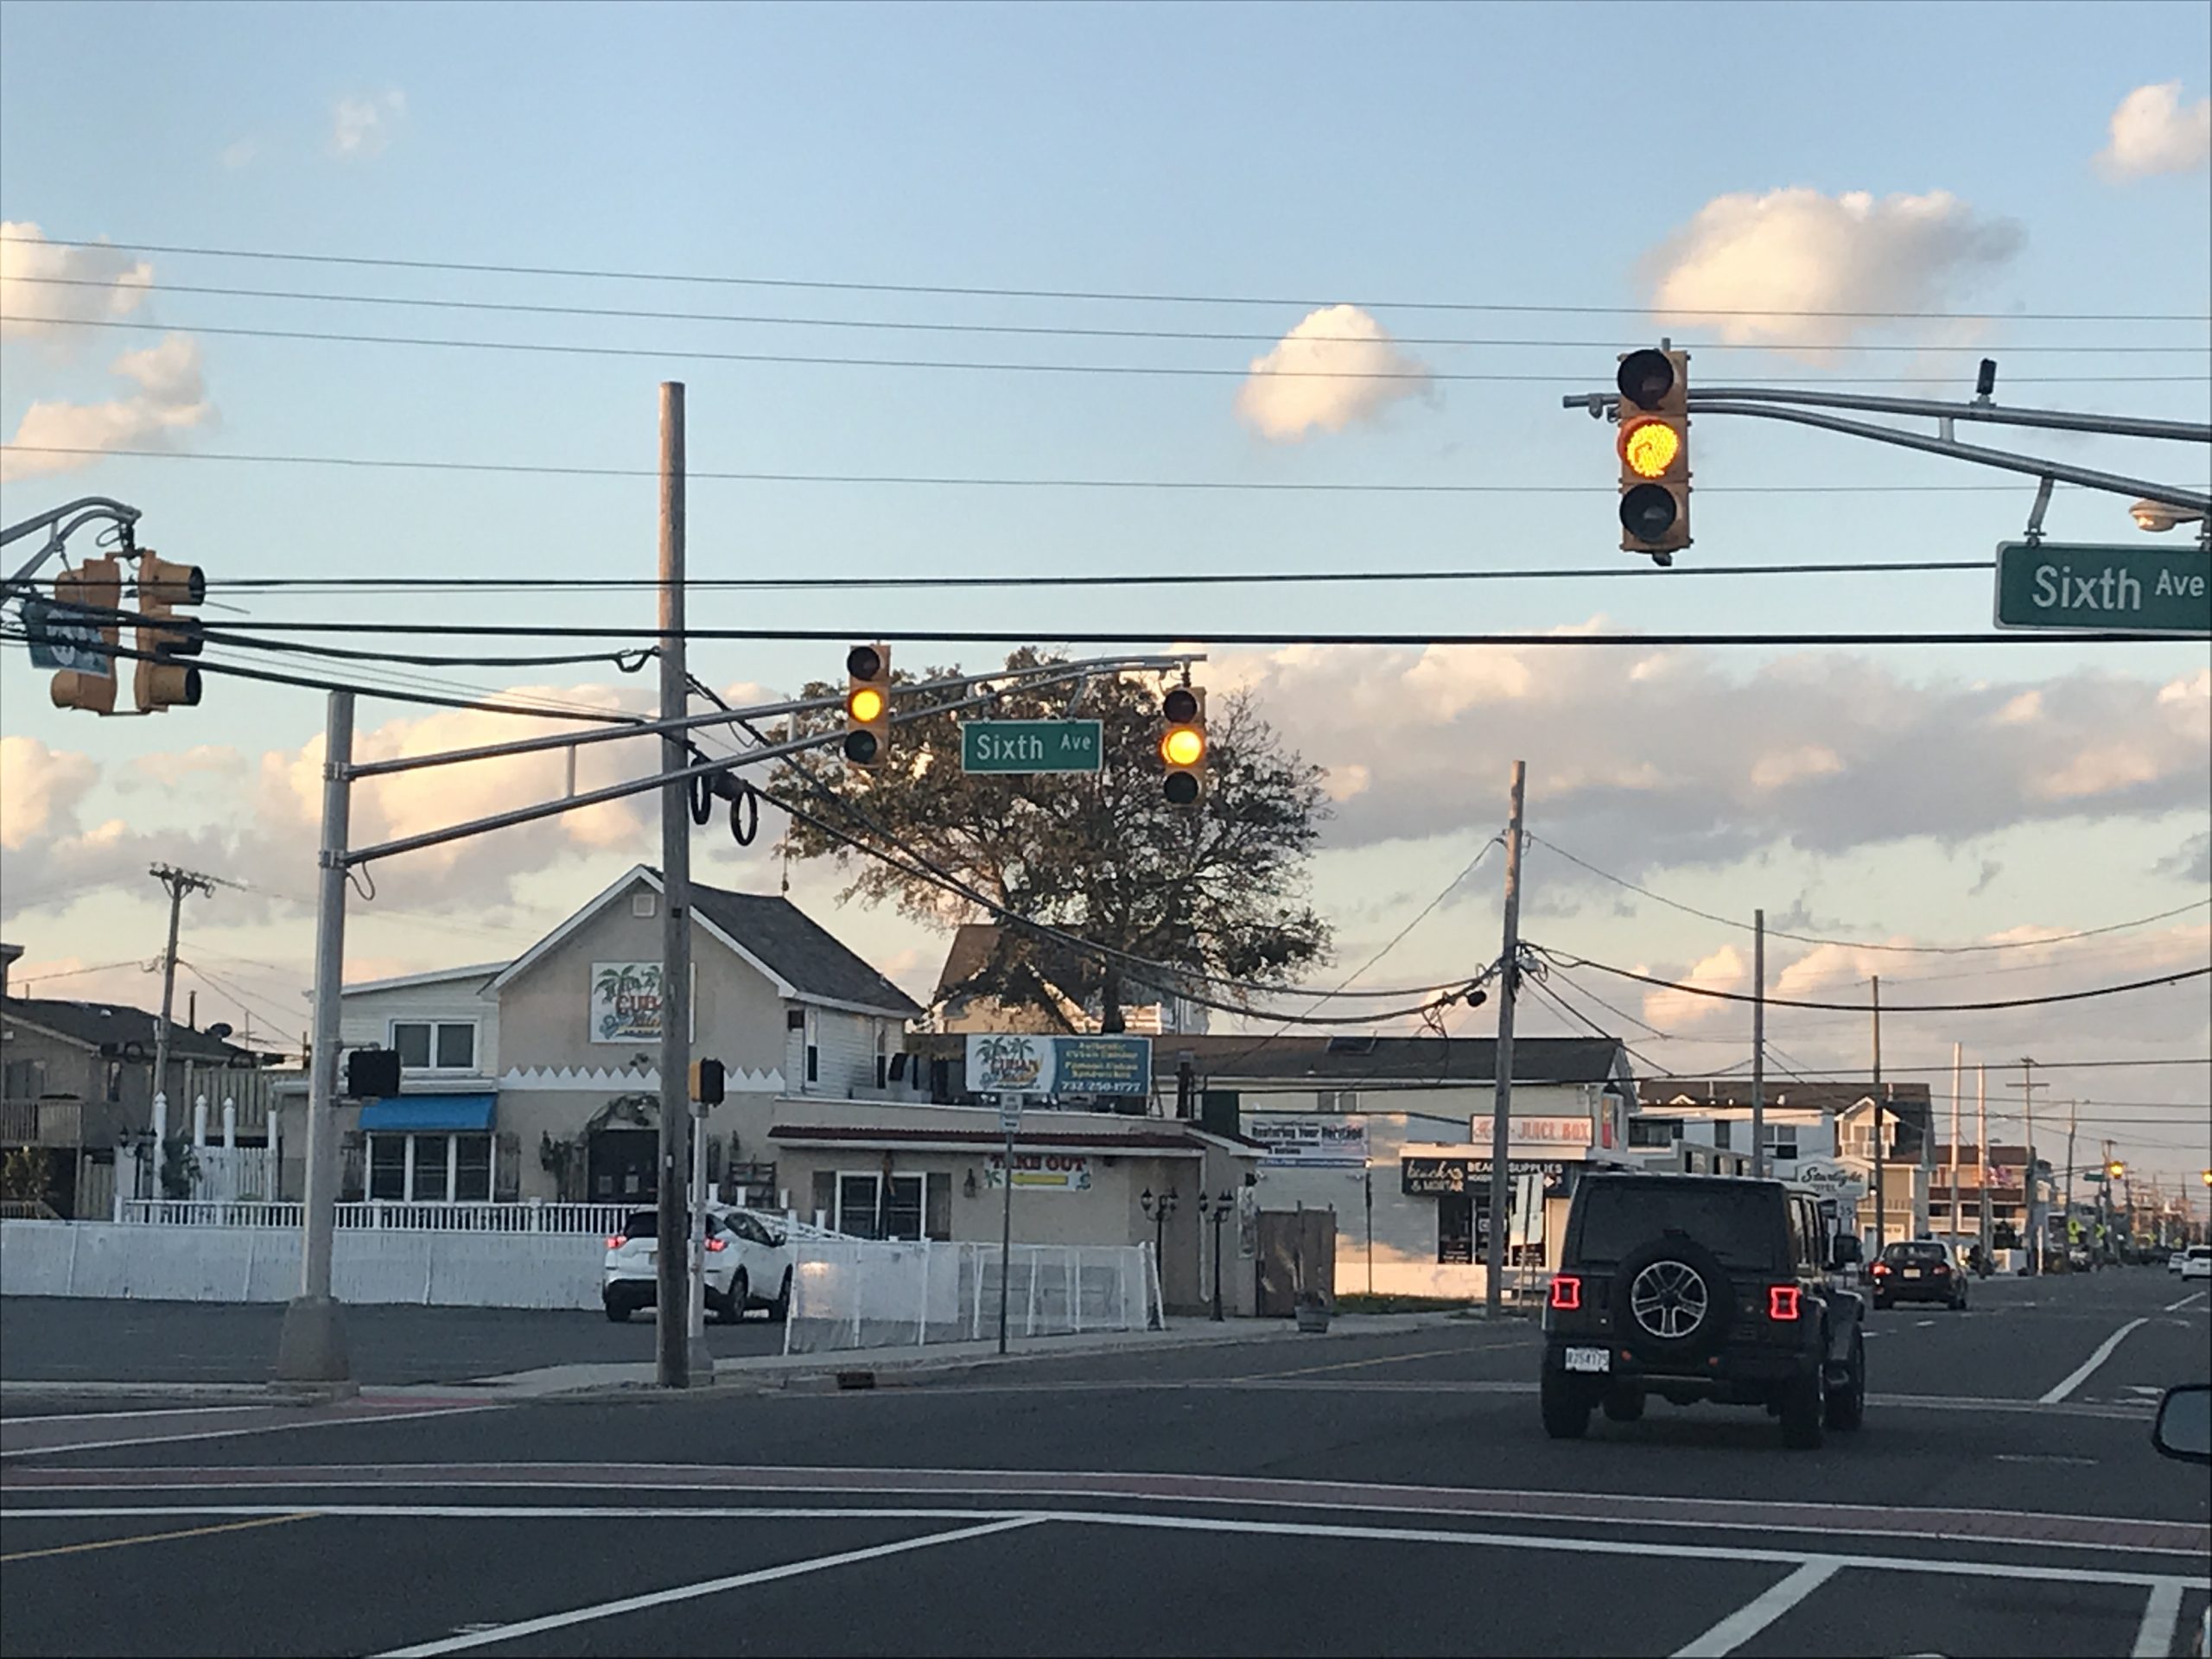 The intersection of Sixth Ave. and Route 35 north in Ortley Beach. (Photo: Daniel Nee)